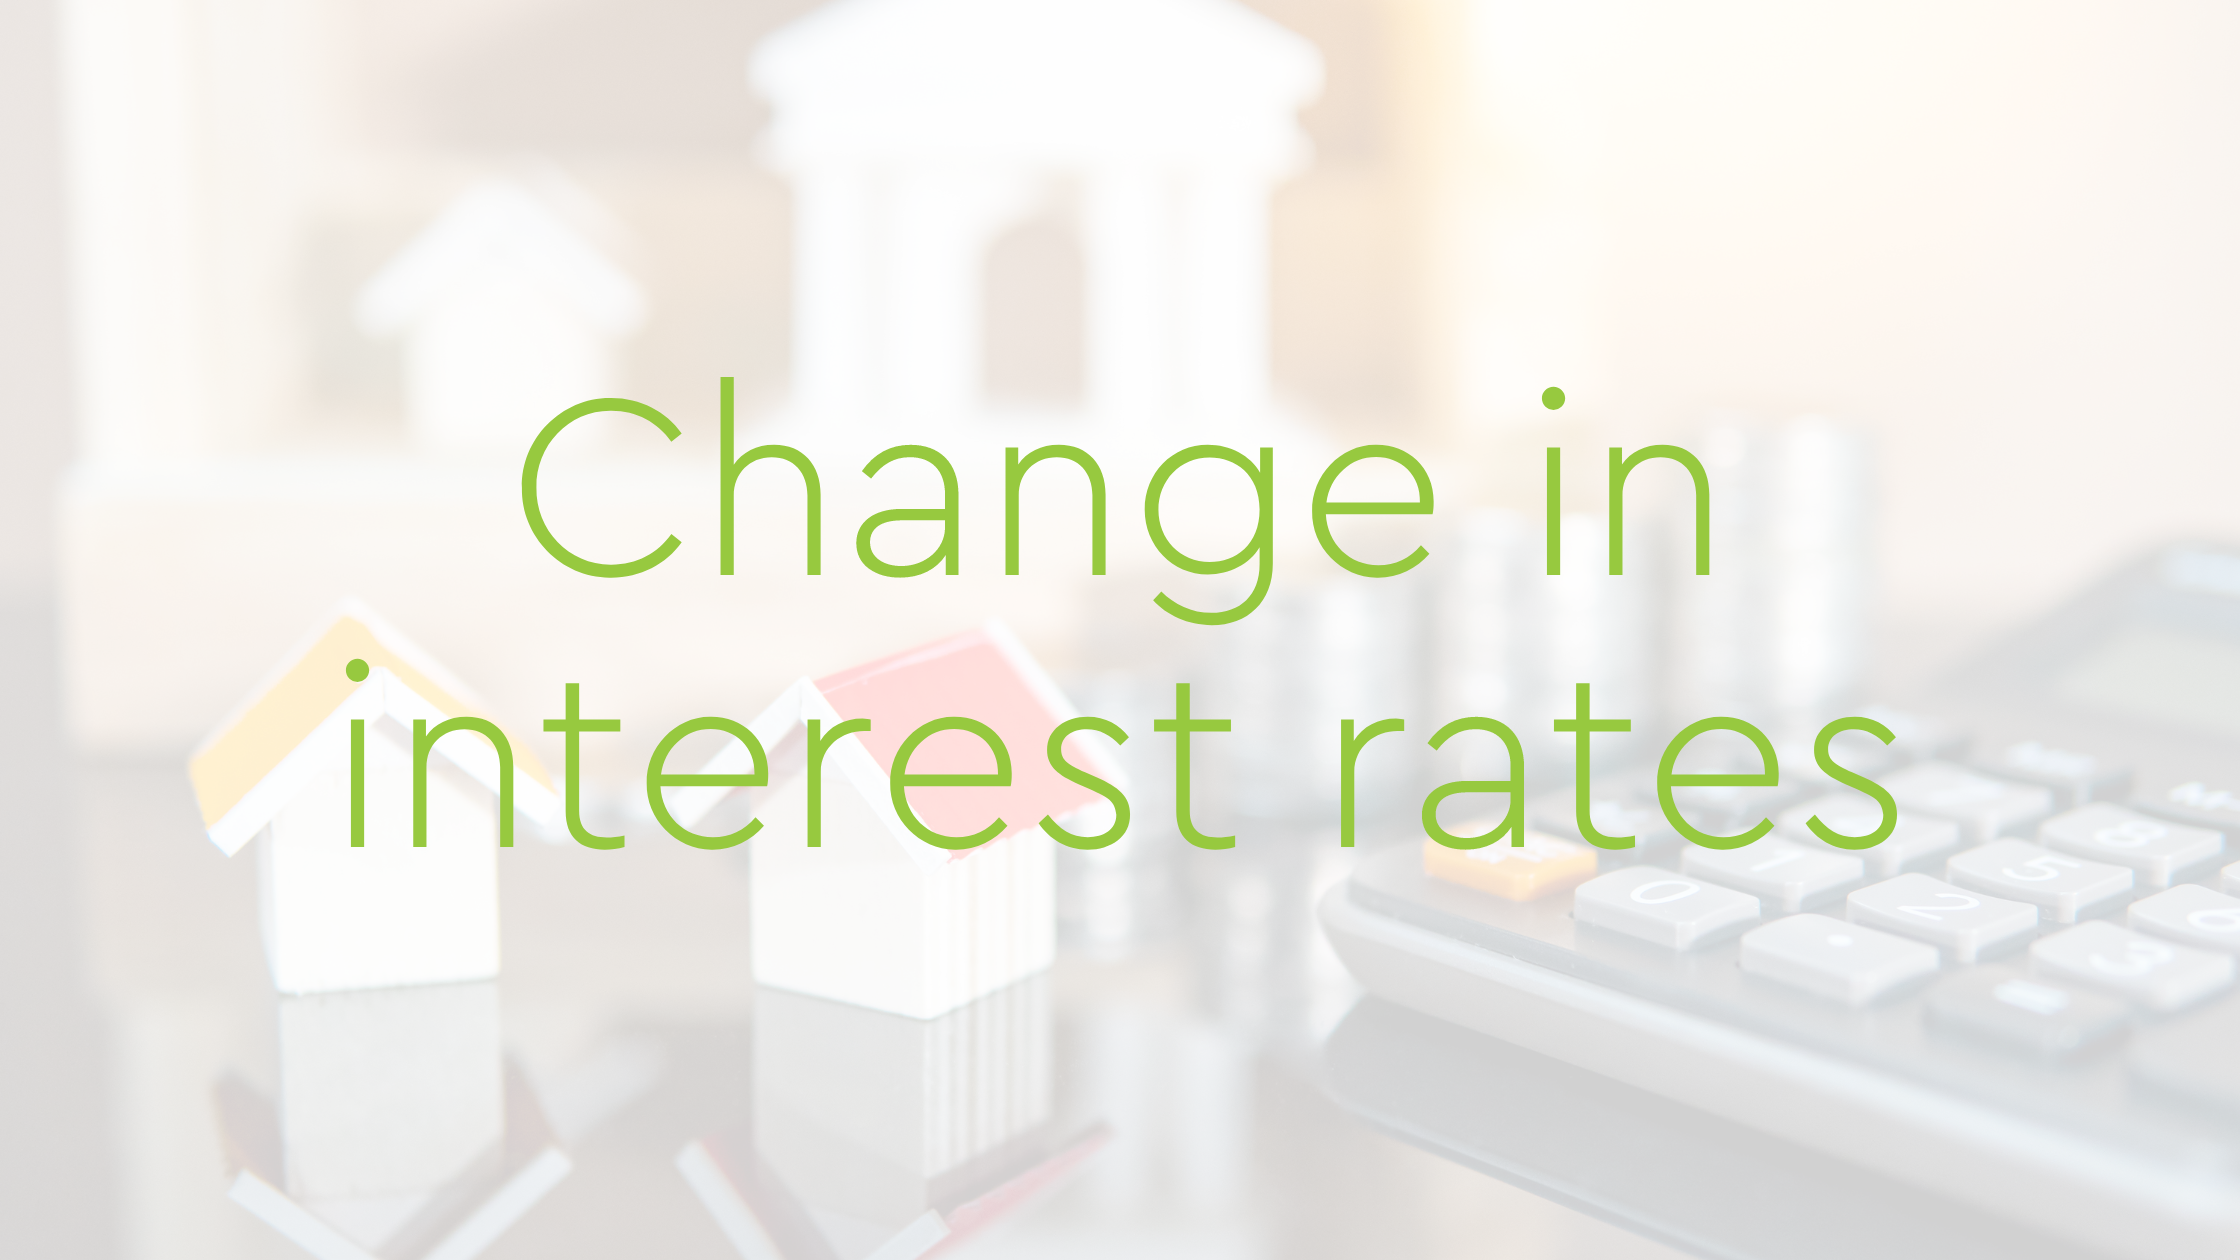 Change in interest rates